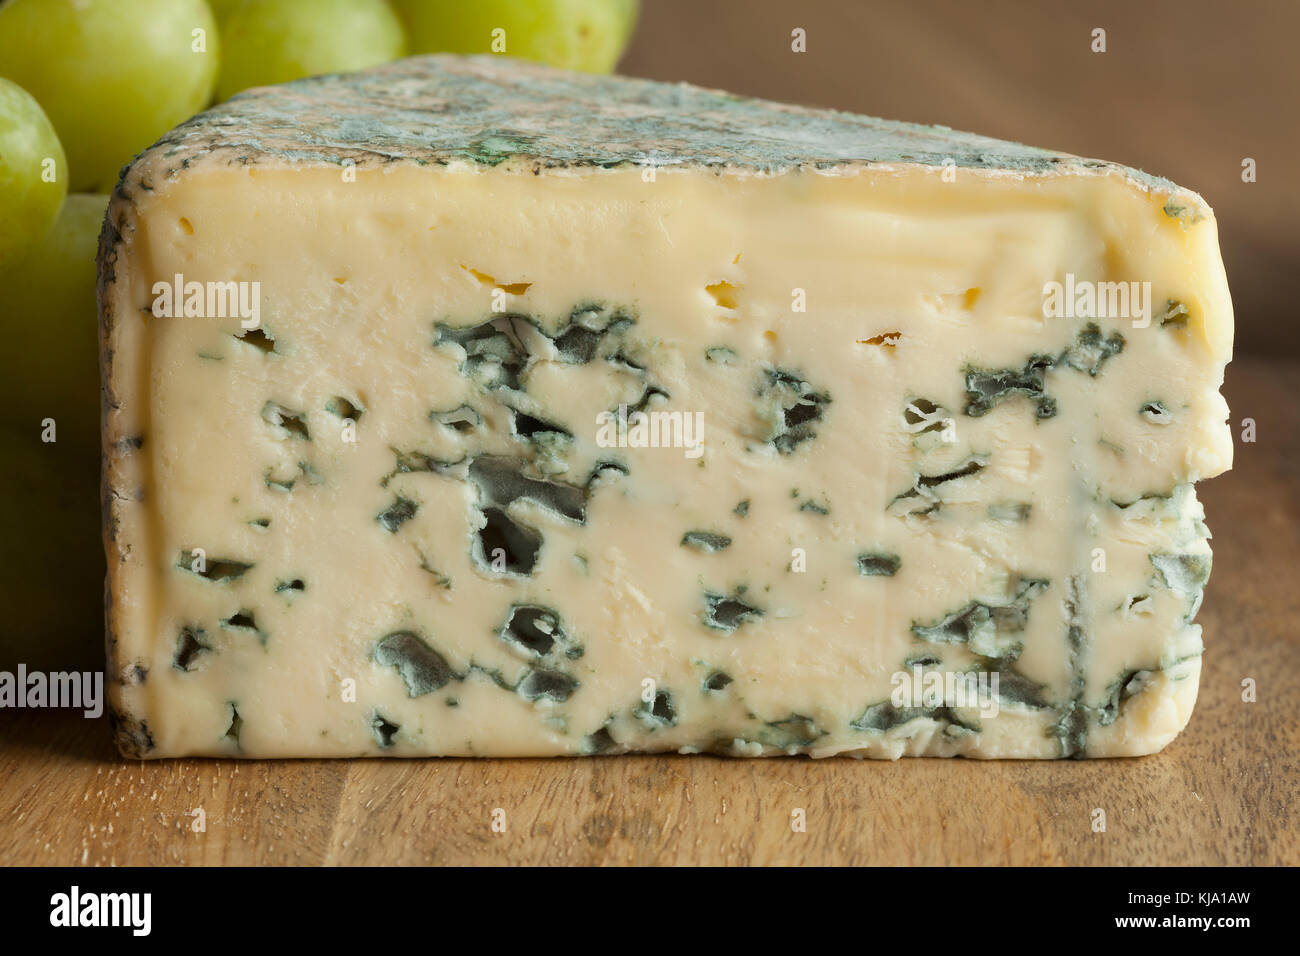 Piece of French Bleu d'auvergne cheese close up Stock Photo